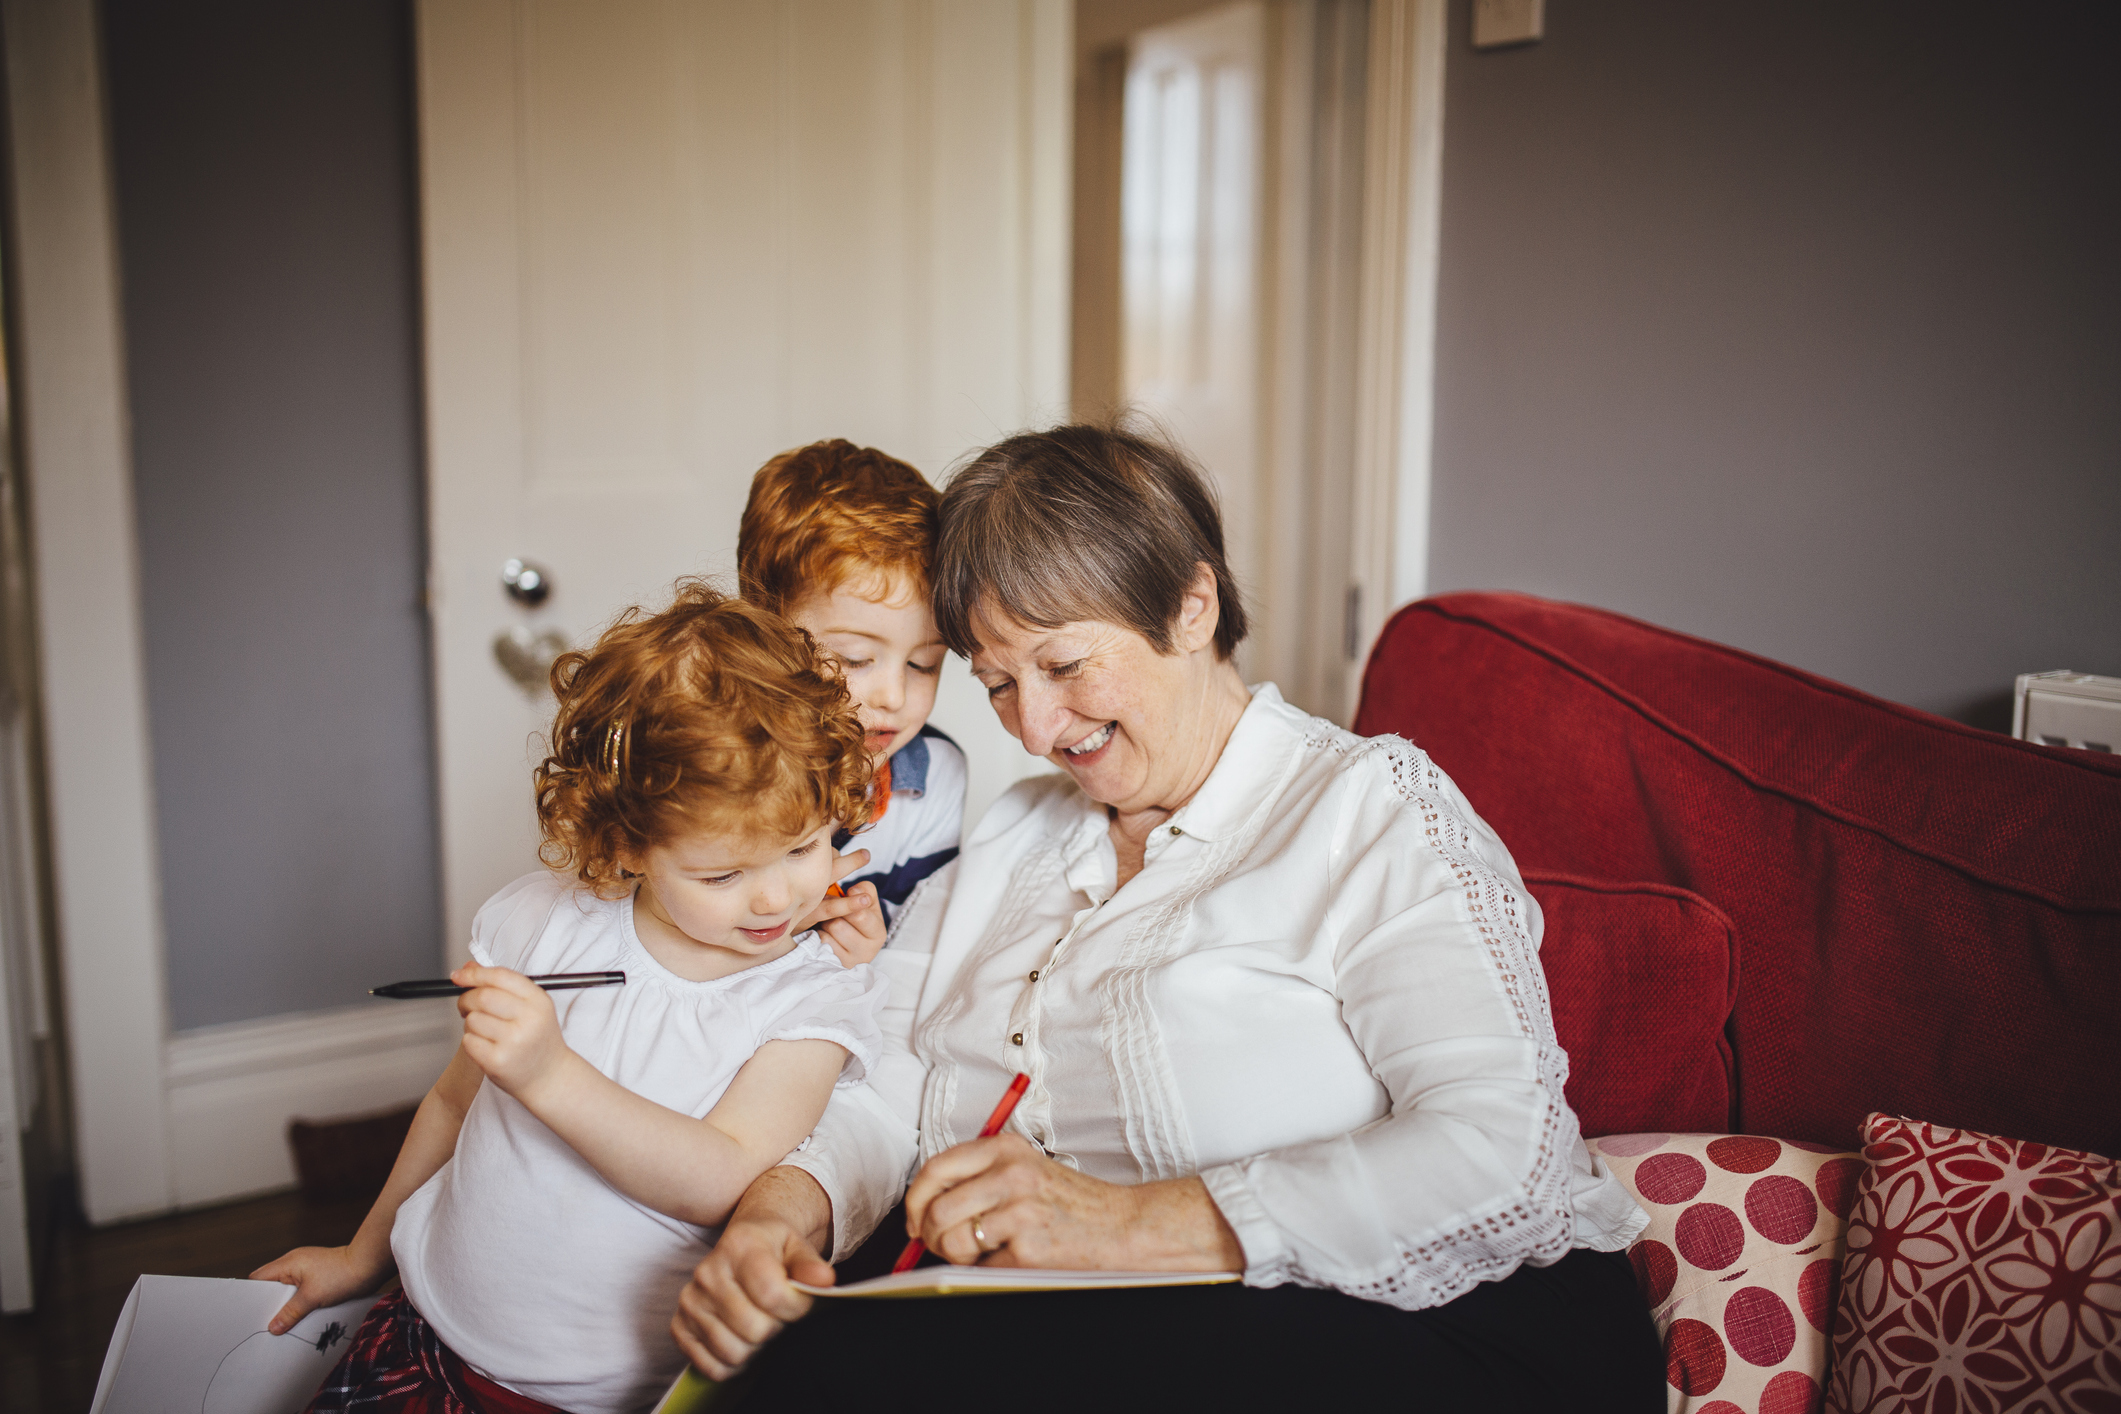 The Big Four: Factors to Consider Before Employing a Nanny